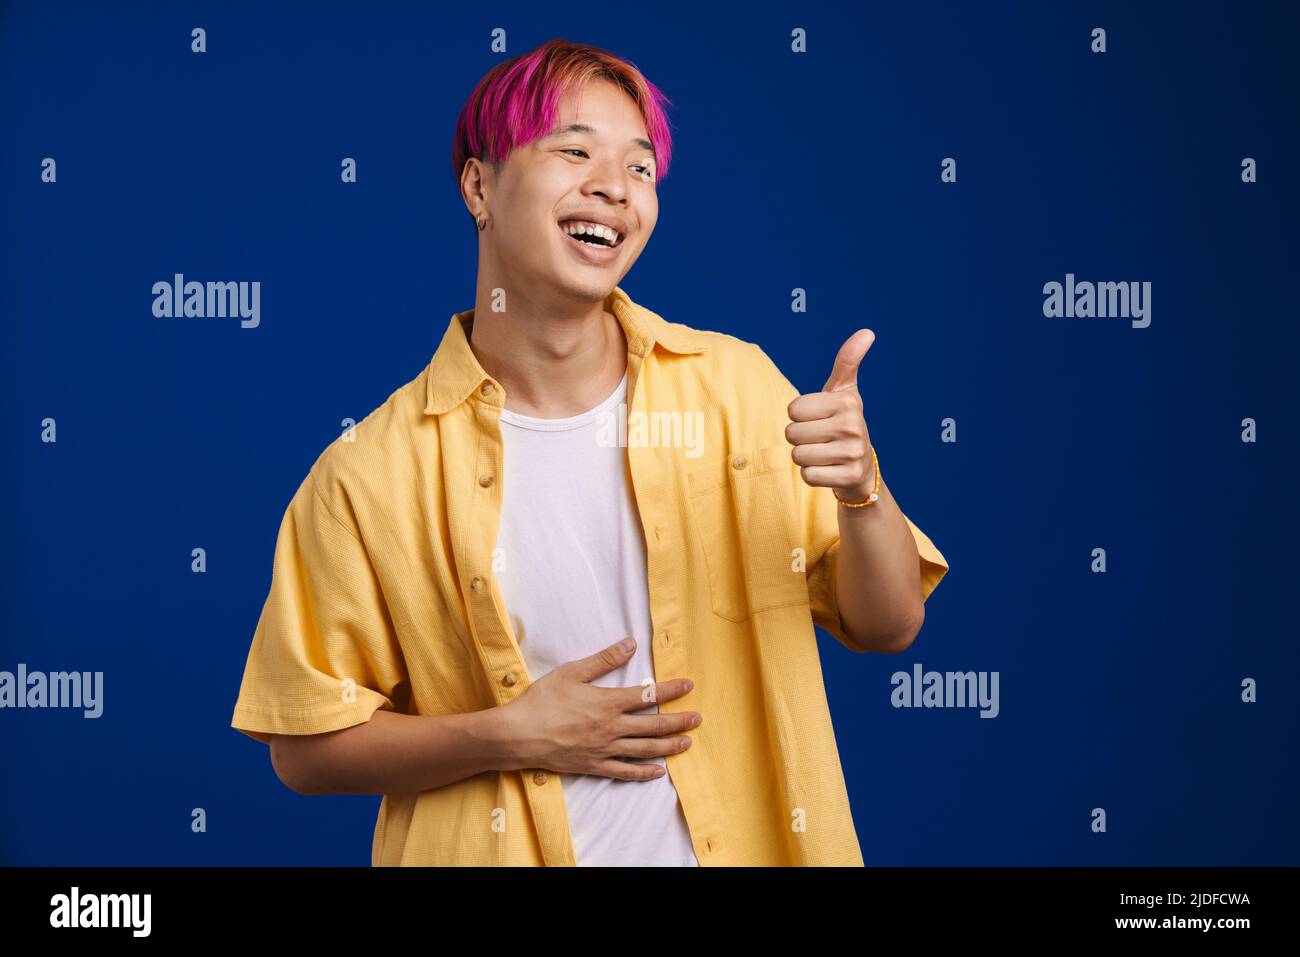 Asian boy with pink hair laughing while showing thumb up isolated over blue  background Stock Photo - Alamy